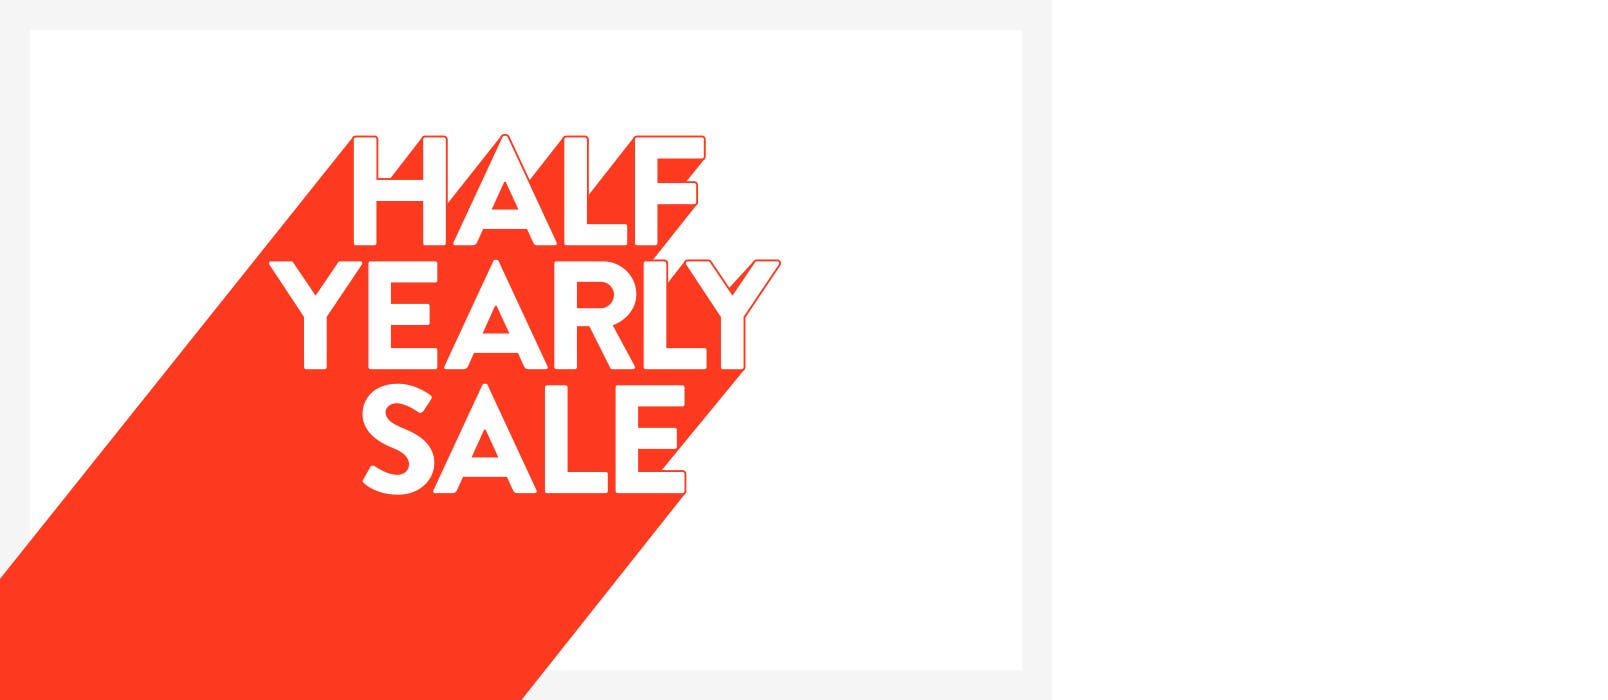 Half-Yearly Sale: up to 50% off through May 29.